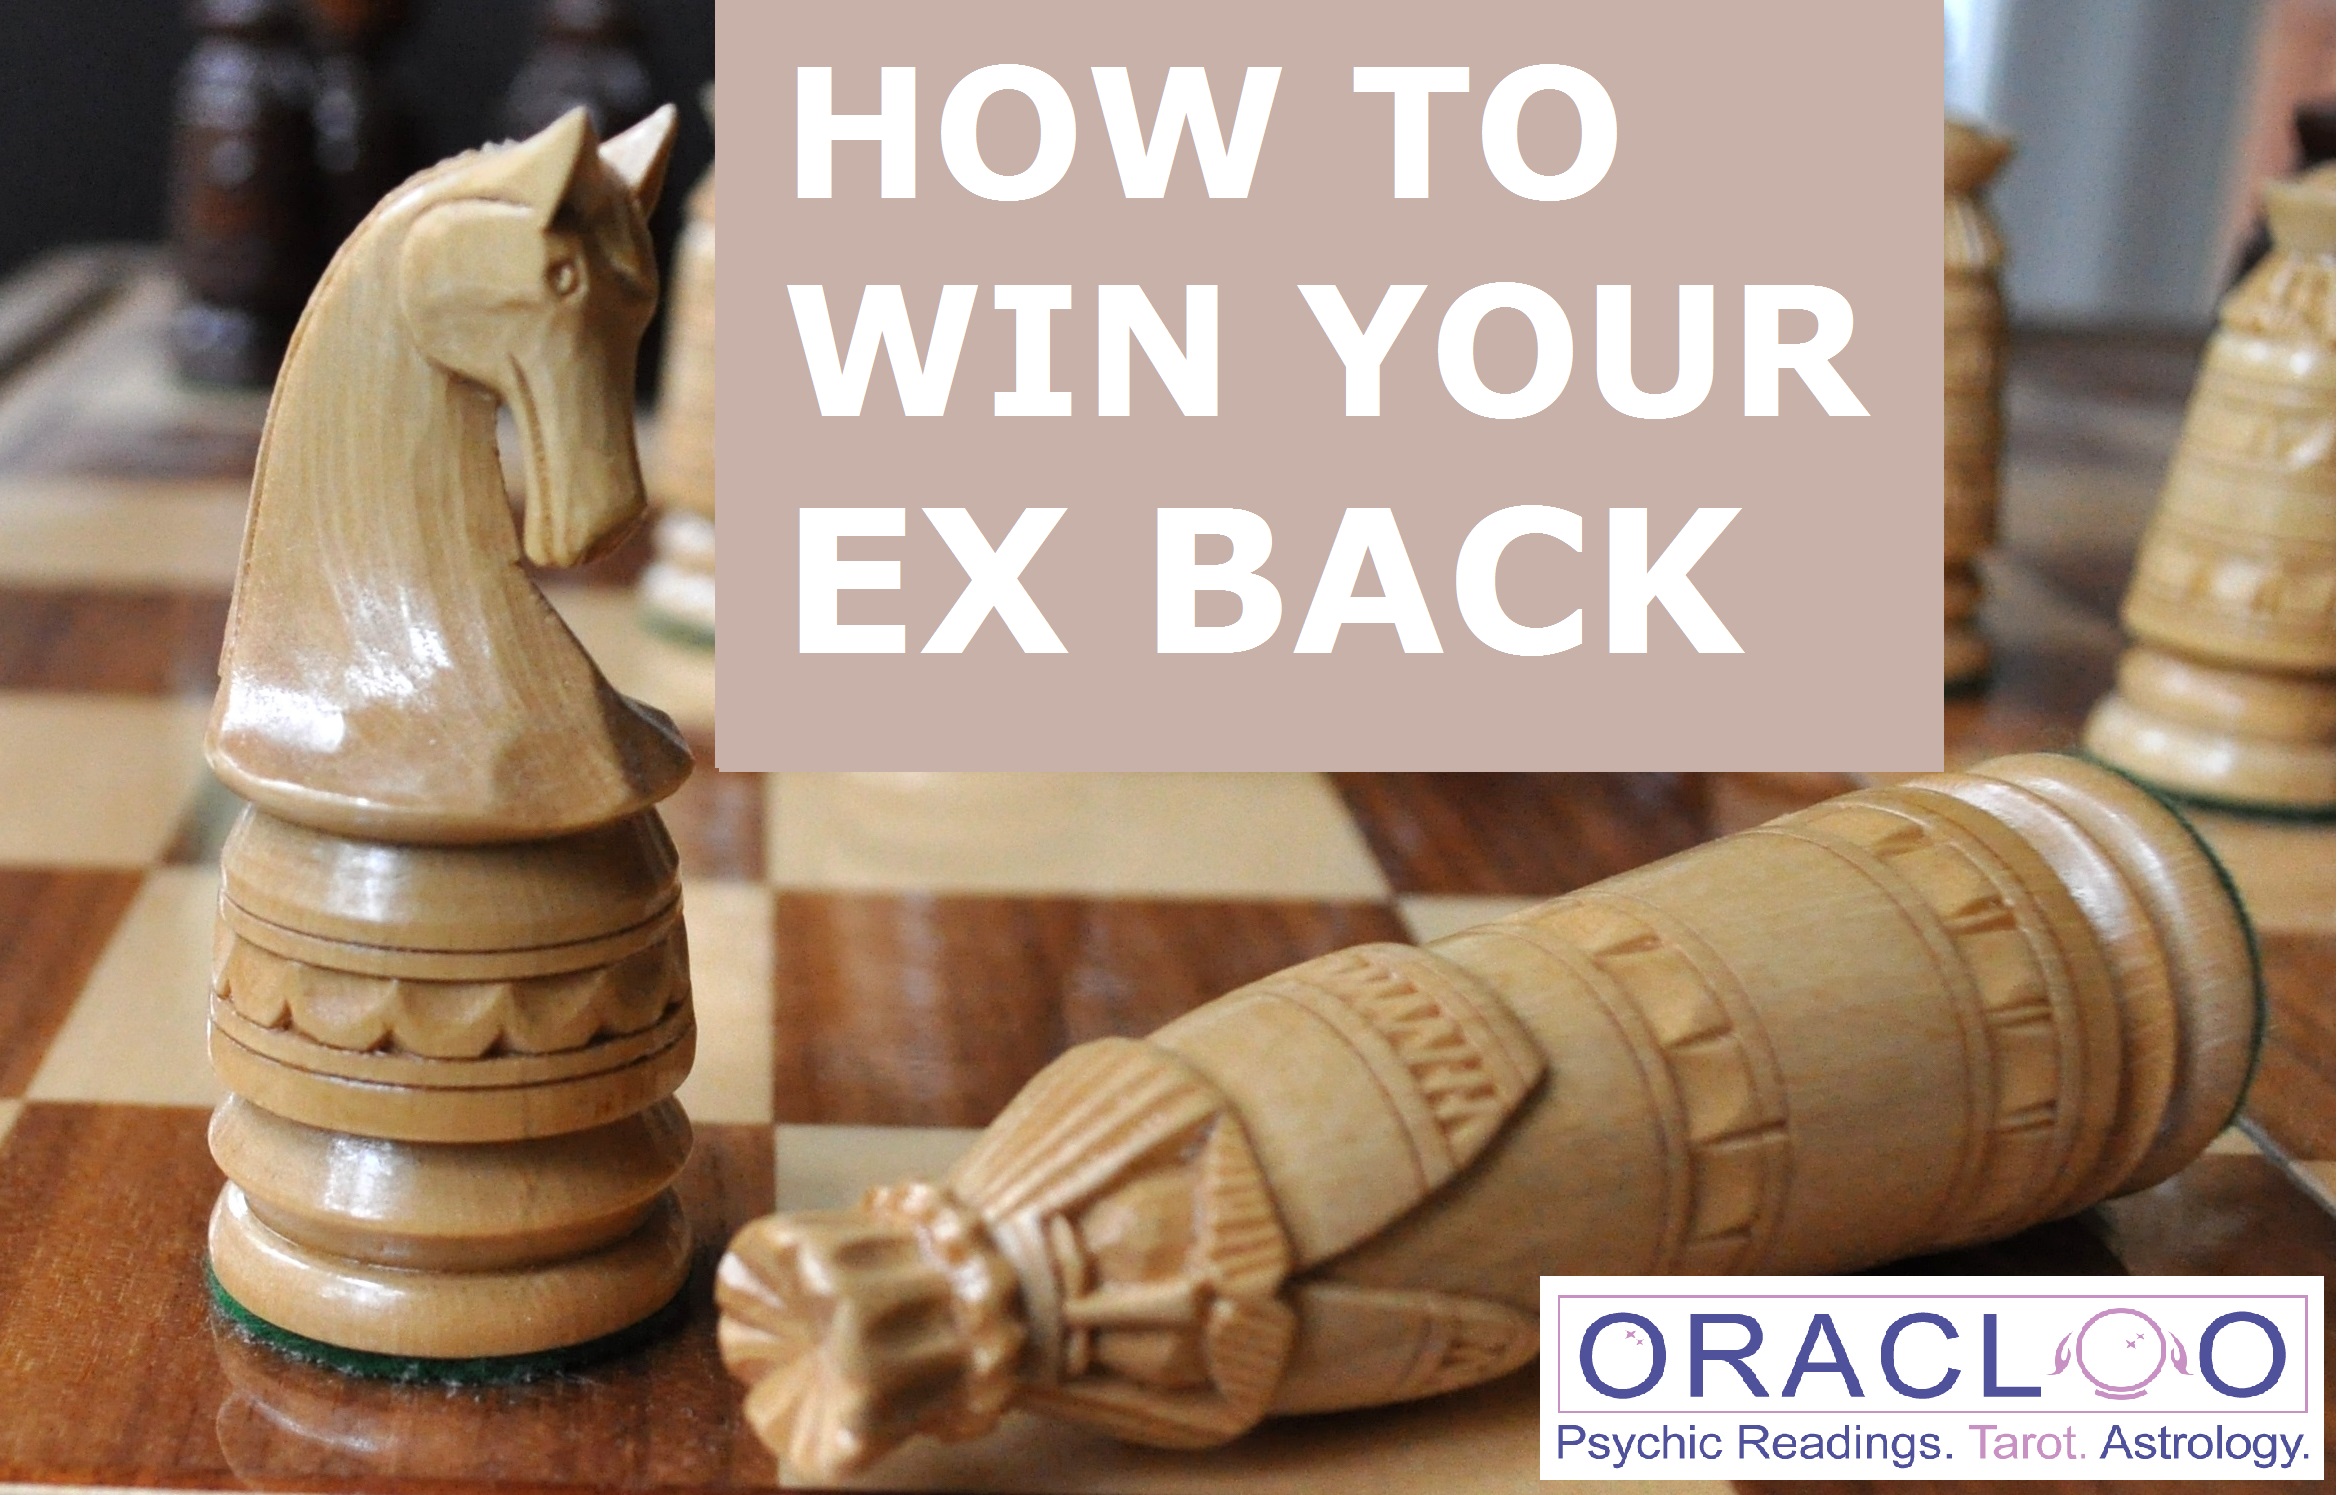 How to win your ex back Oracloo